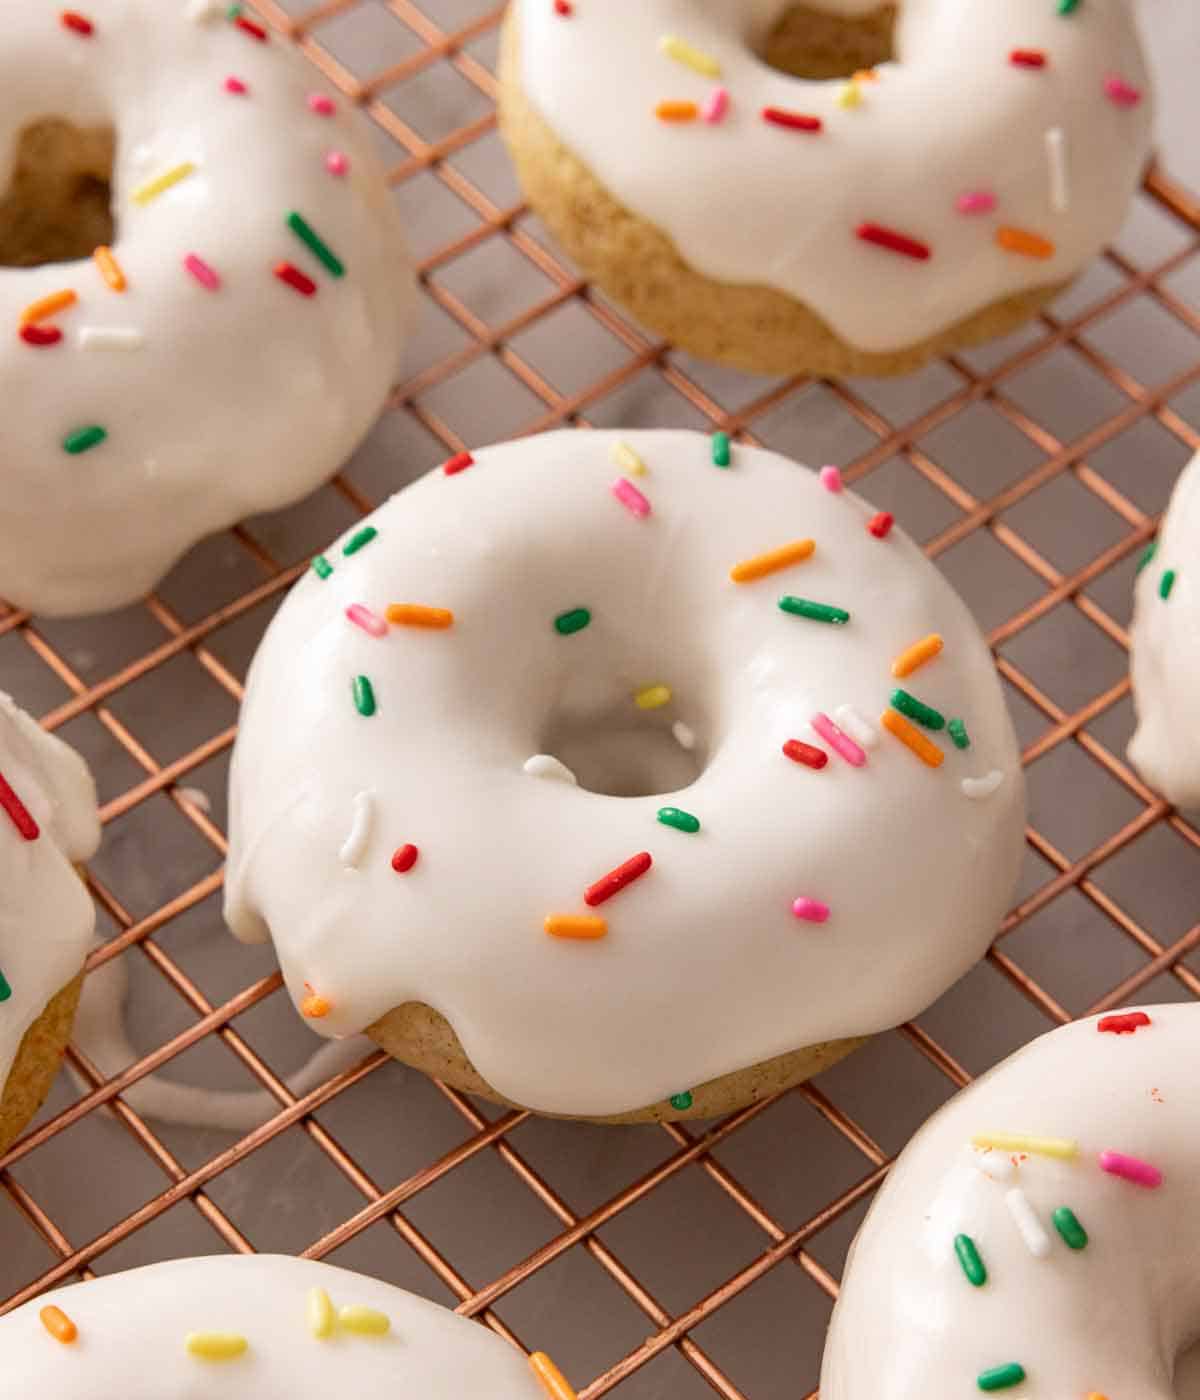 Multiple glazed and sprinkled baked donuts on a wire rack.